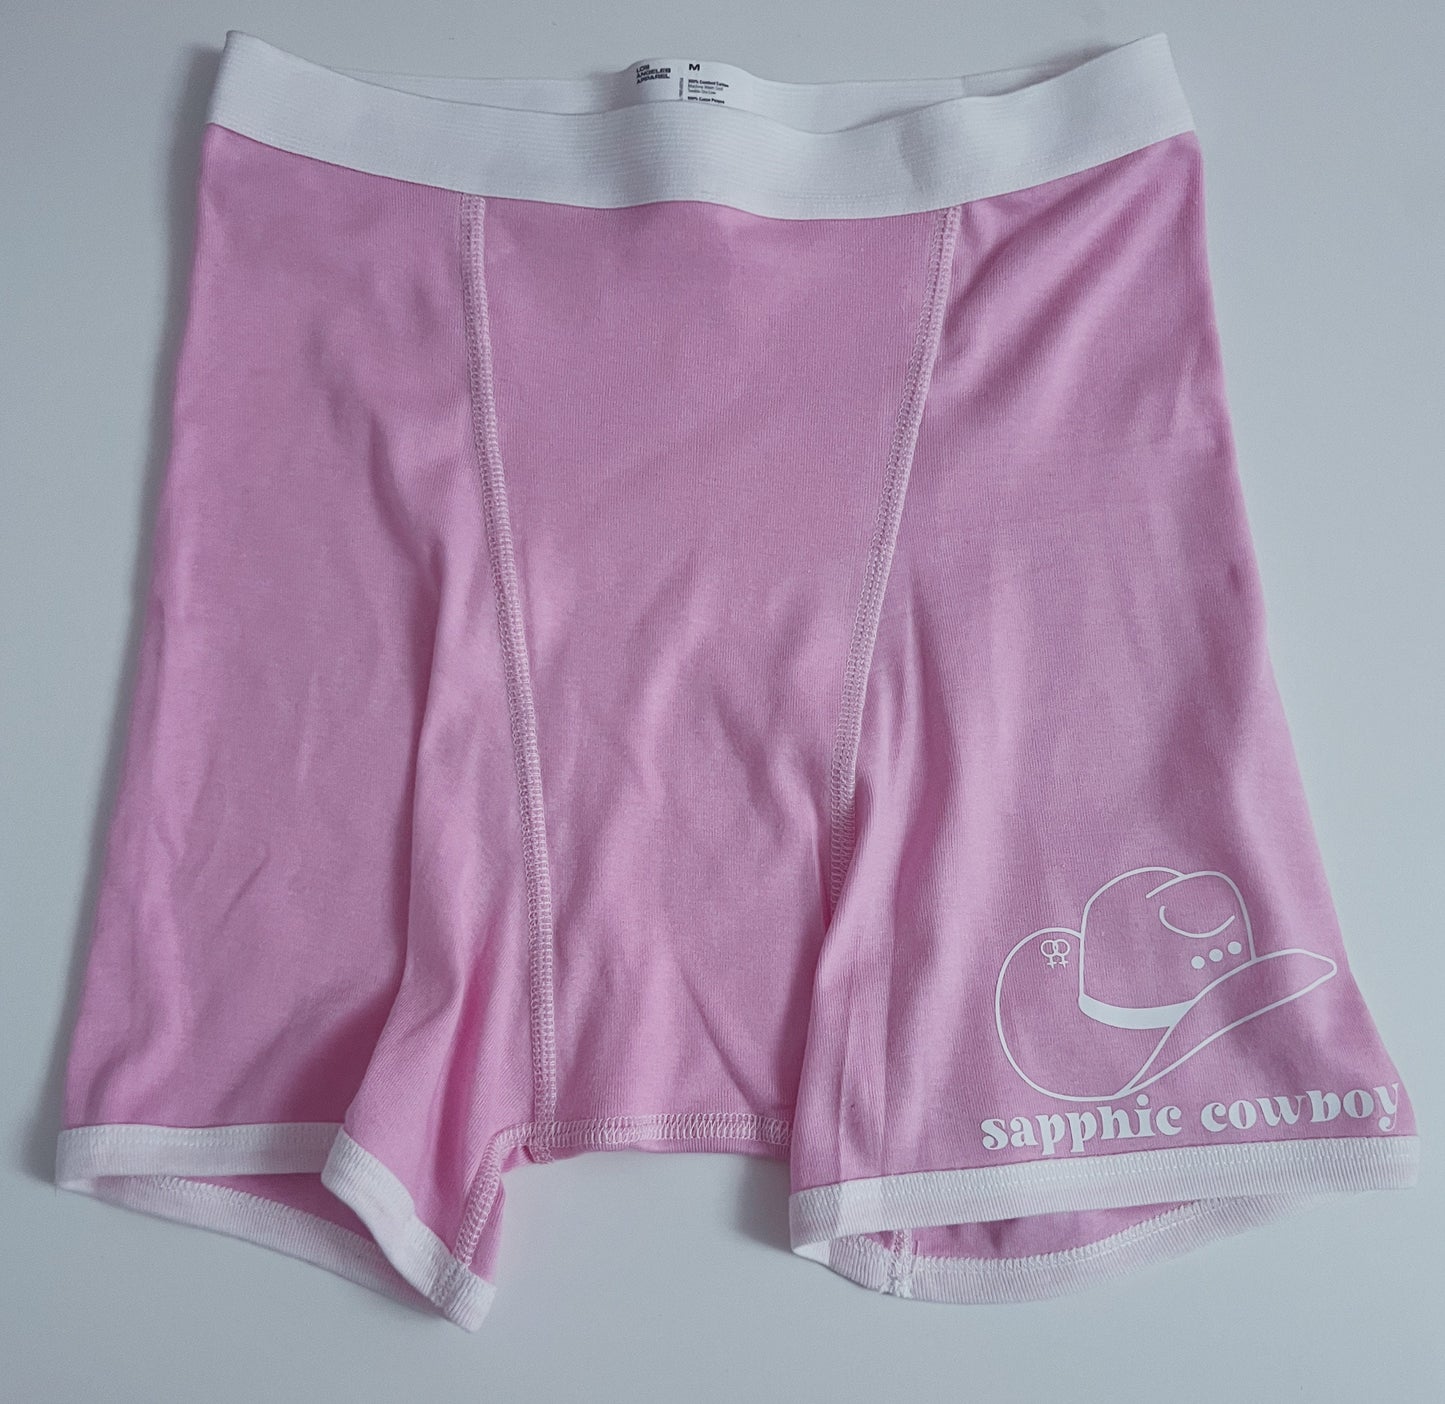 PRIDE 2022 Sapphic Cowboy Boxer Briefs, Woxer or TomboyX Dupe, Pride Month lesbian, WLW, bisexual pride, unisex clothing